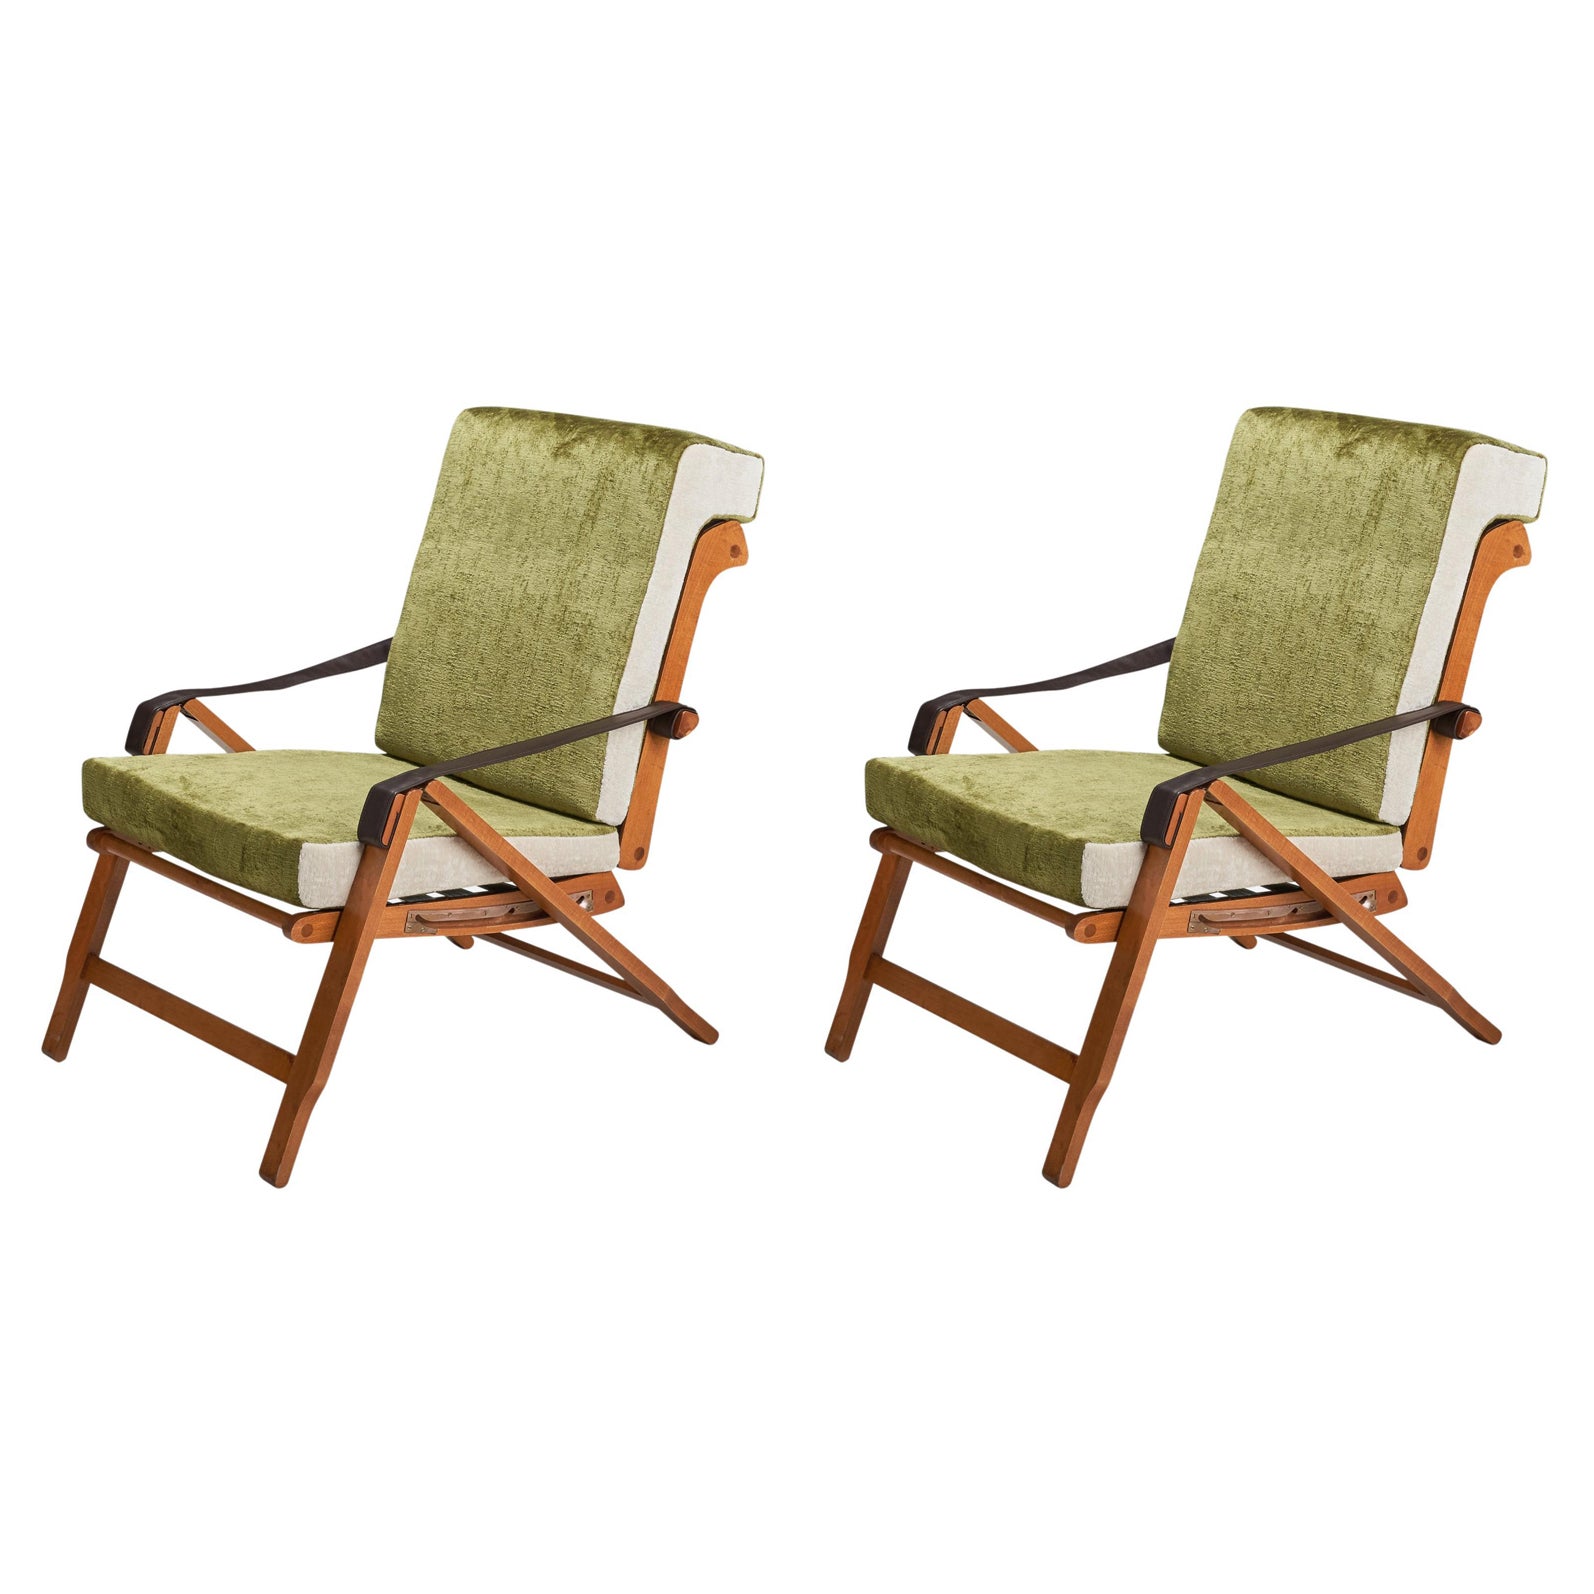 Marco Zanuso, Rare Lounge Chairs, Beech, Leather, Brass, Velvet, Italy, 1960s For Sale